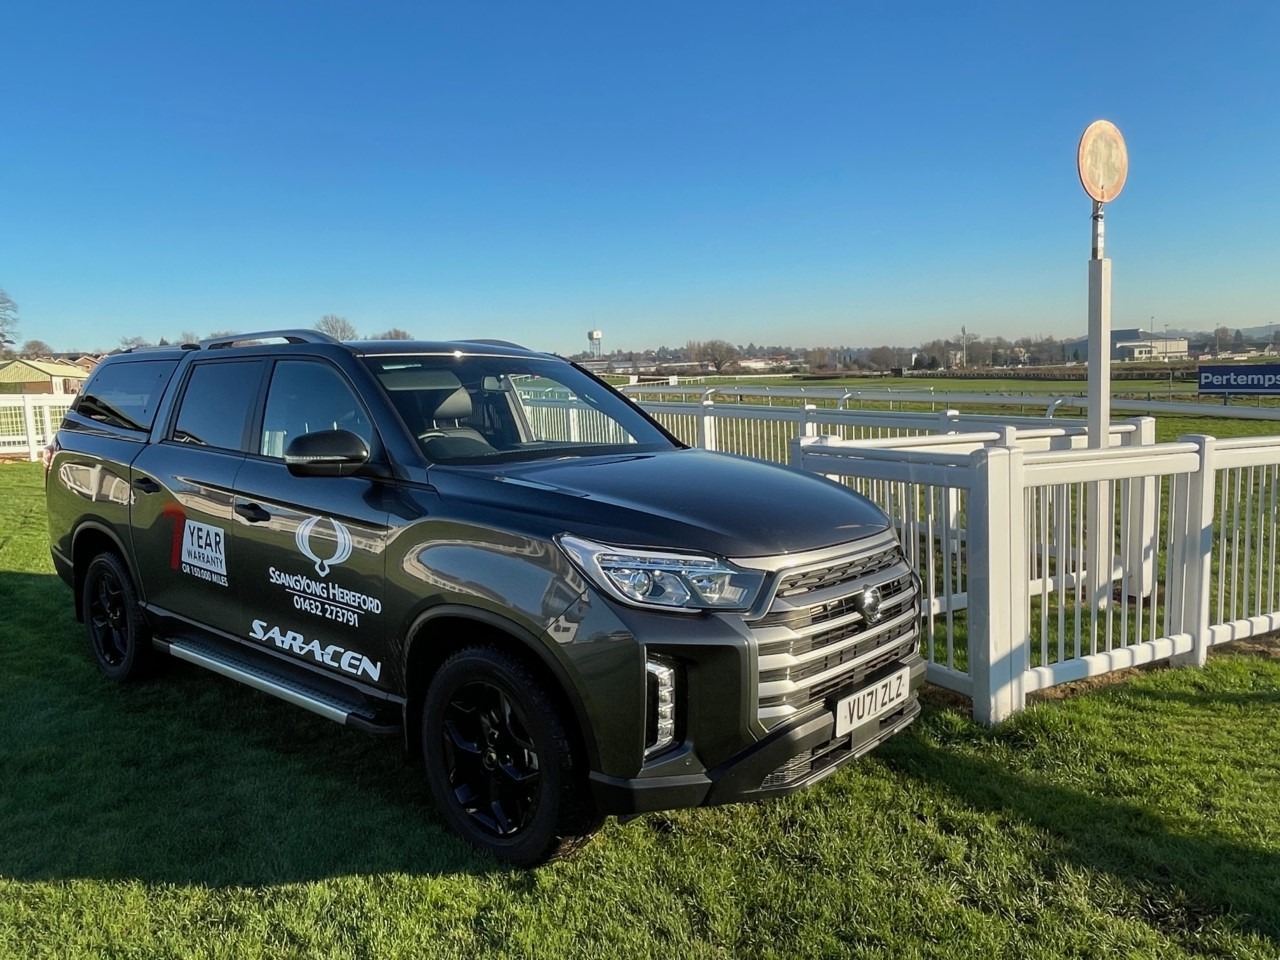 SsangYong Hereford Sponsers Hereford Racecourse